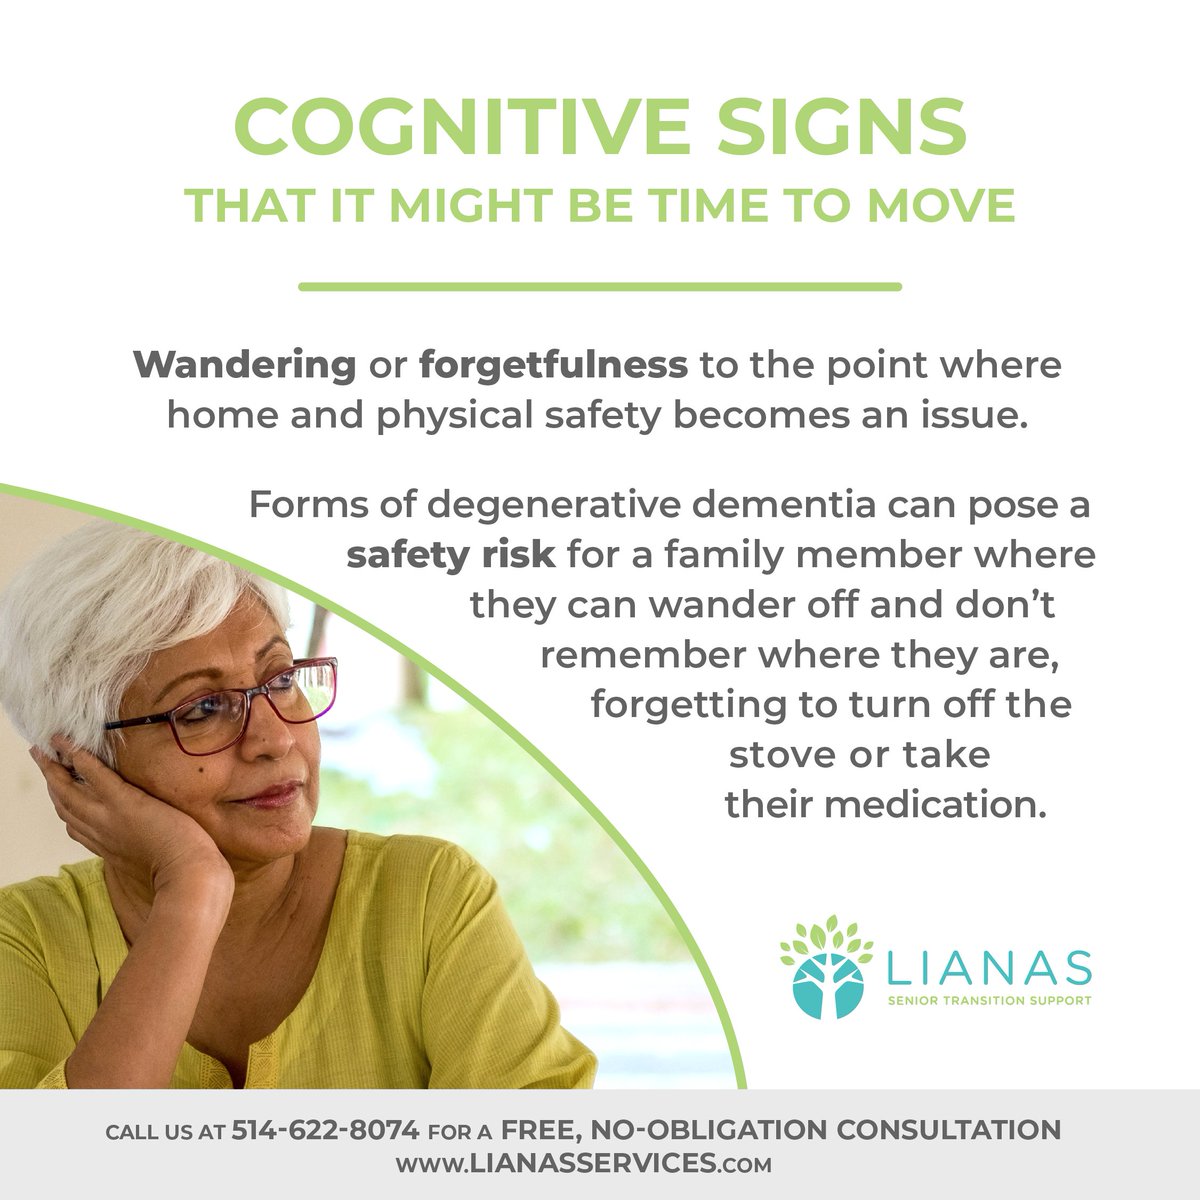 Signs that it might be time to move to a senior living community: Wandering or forgetfulness #helpingmomsanddads #seniorsupport #seniorcare #eldercare #seniorliving